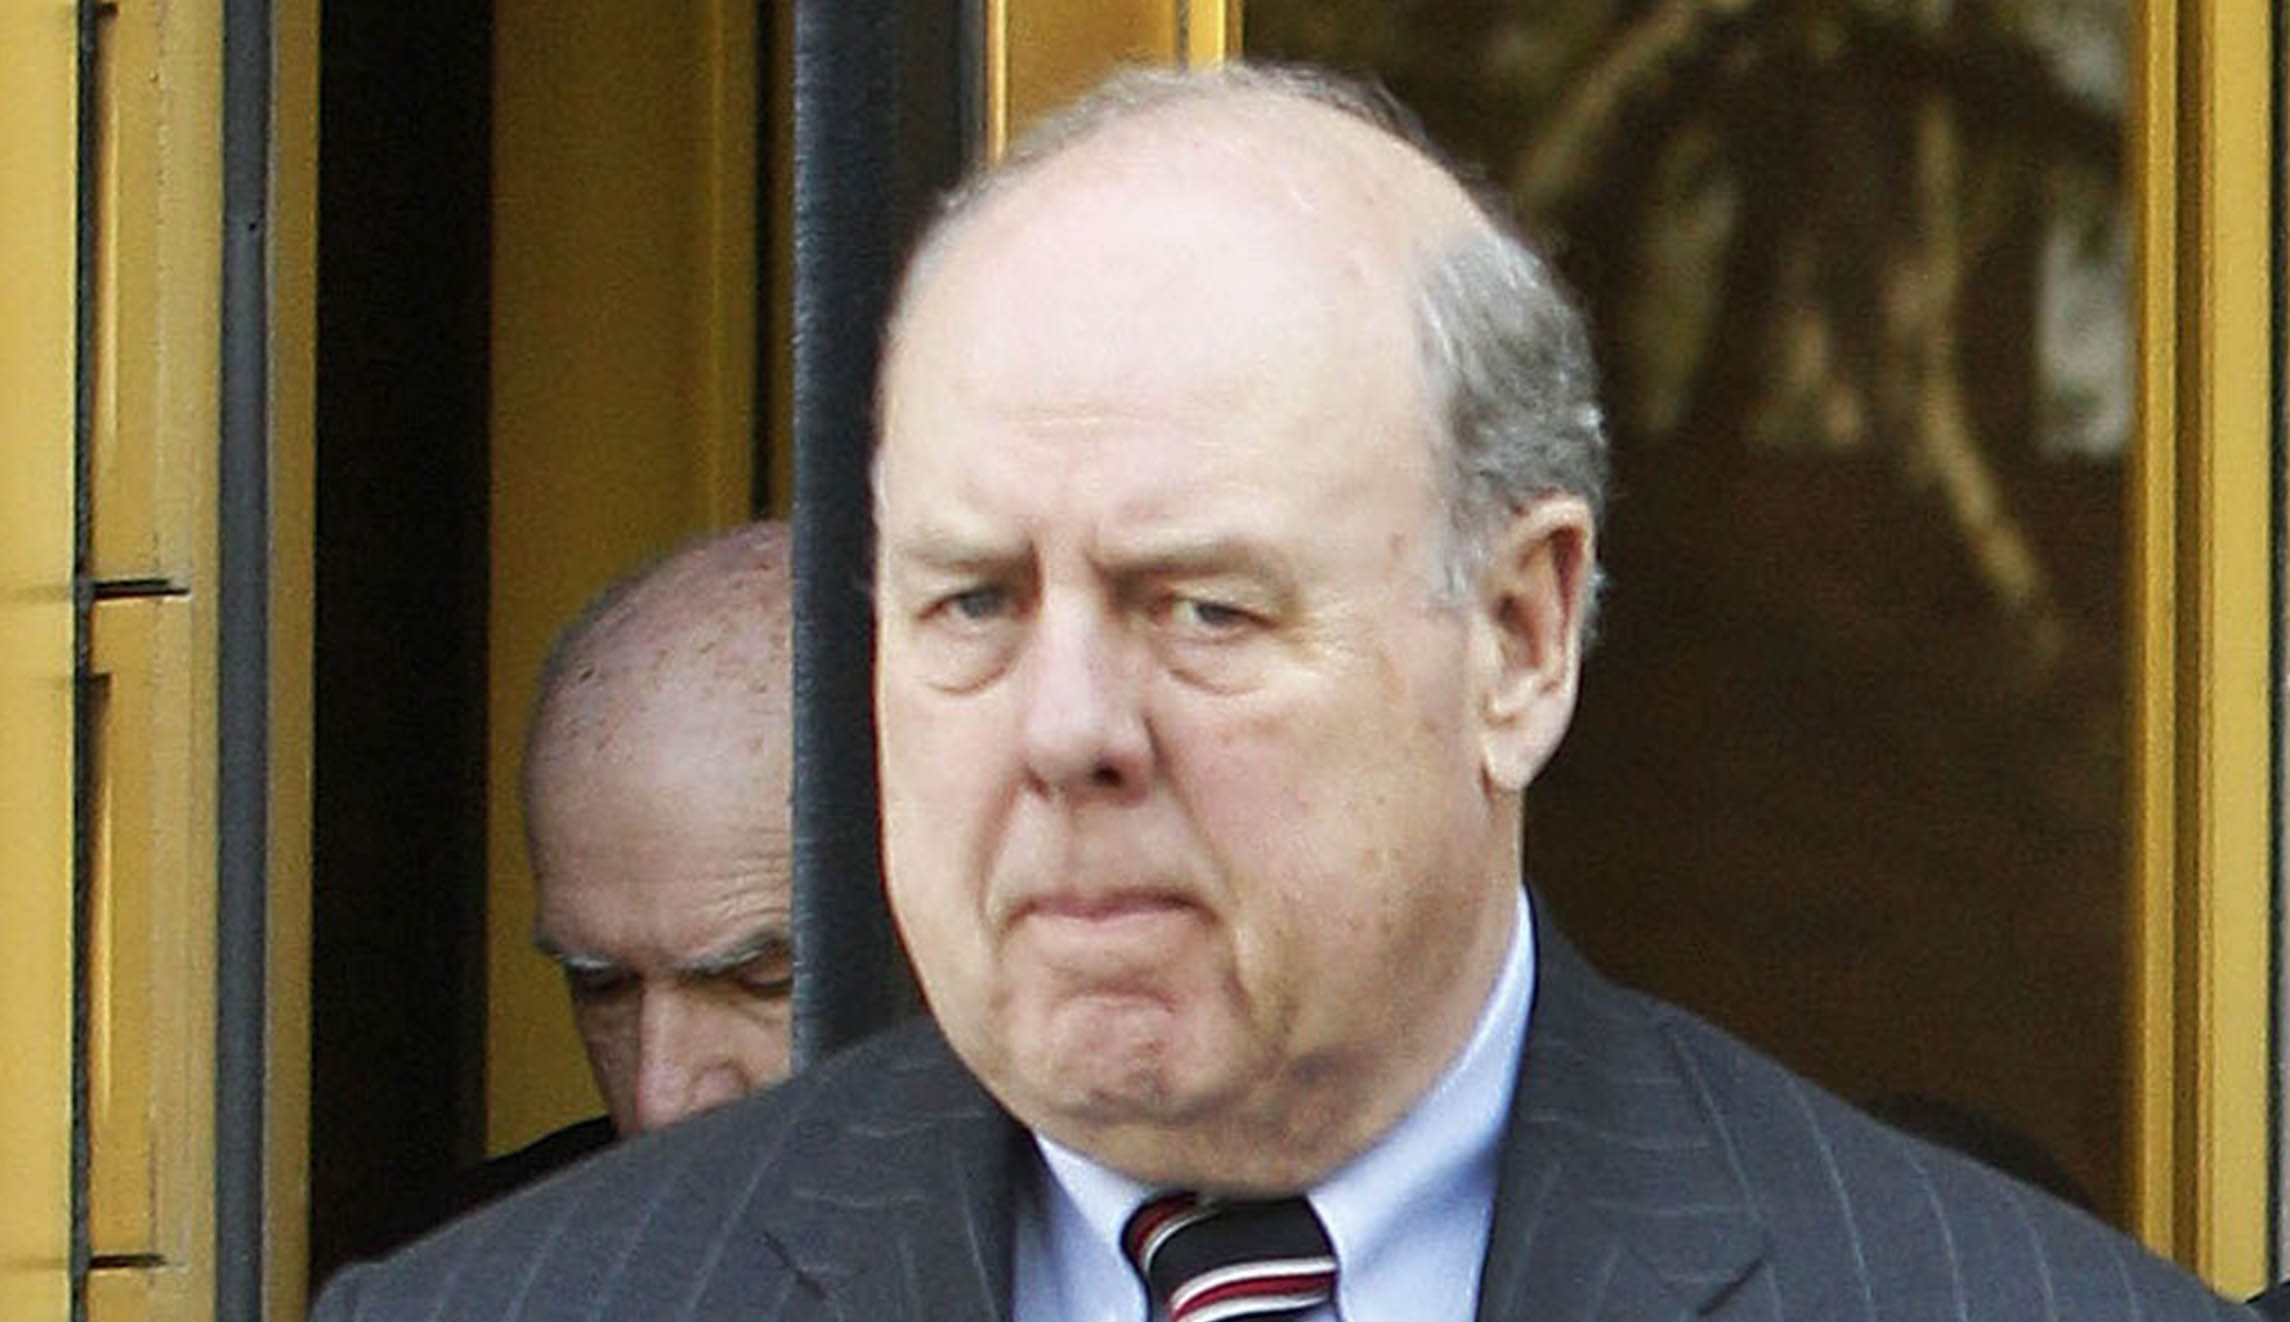 John Dowd is shown in this photo.